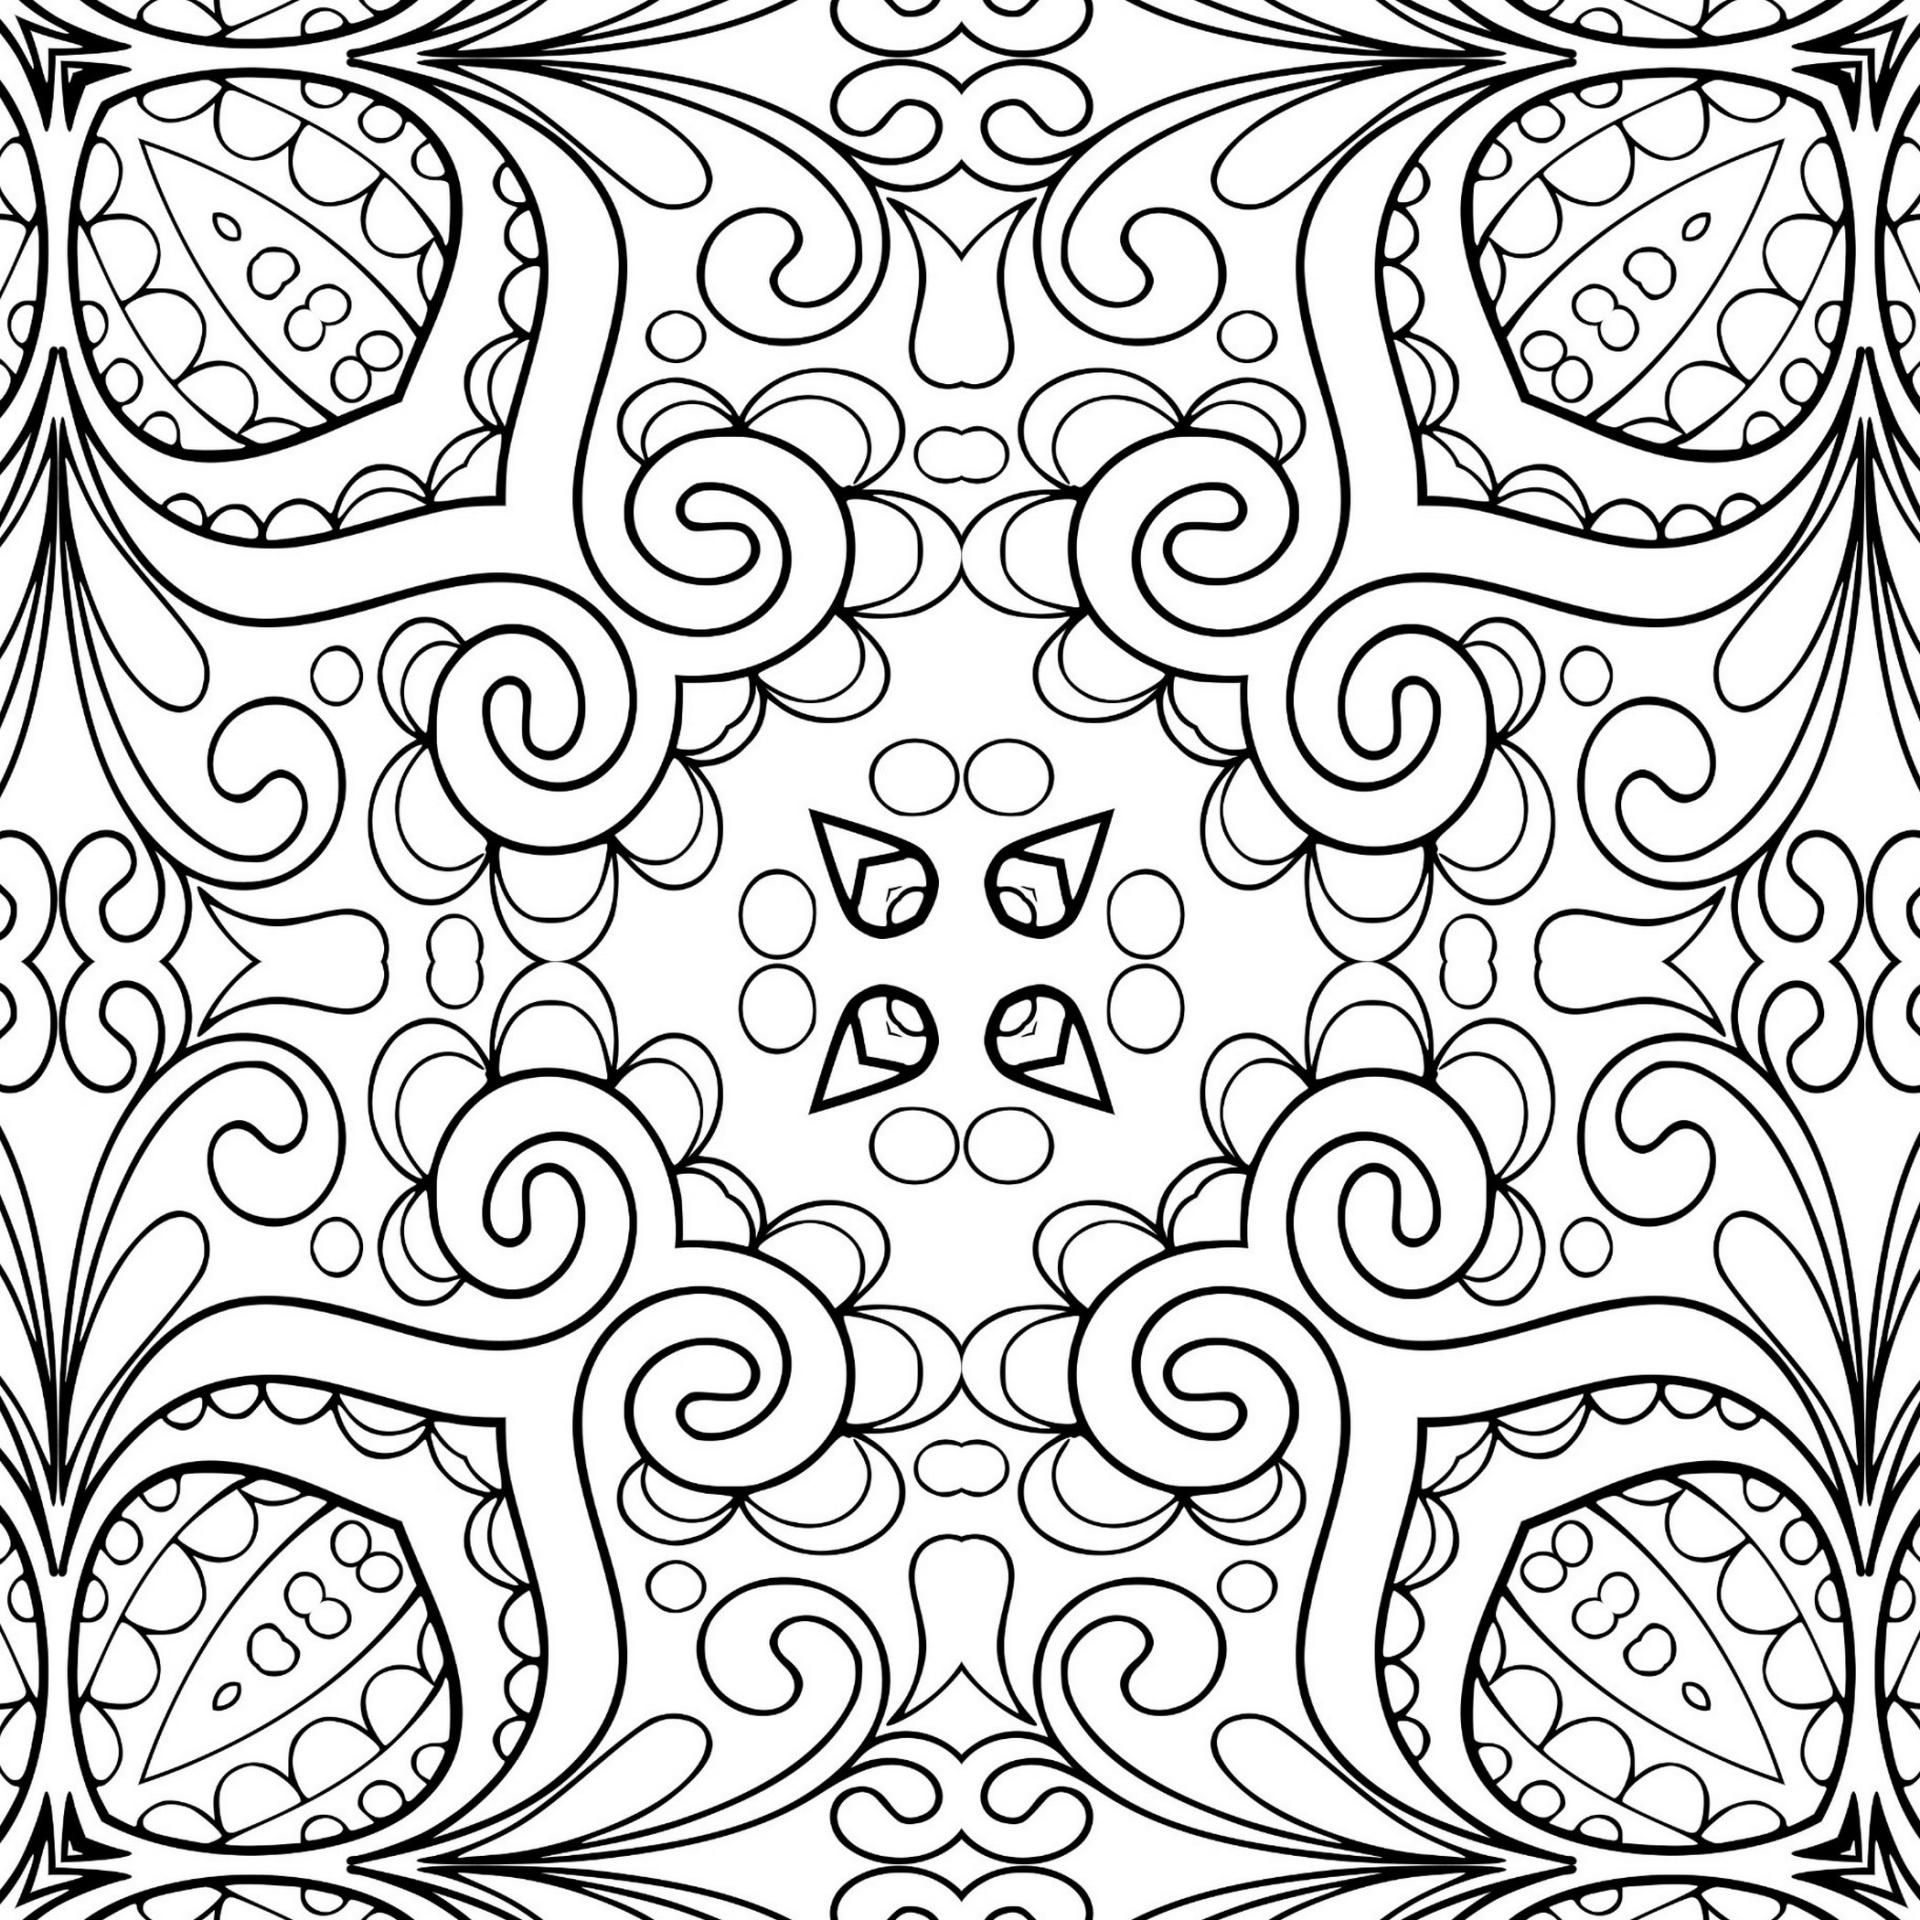 coloring-page-28-free-stock-photo-public-domain-pictures